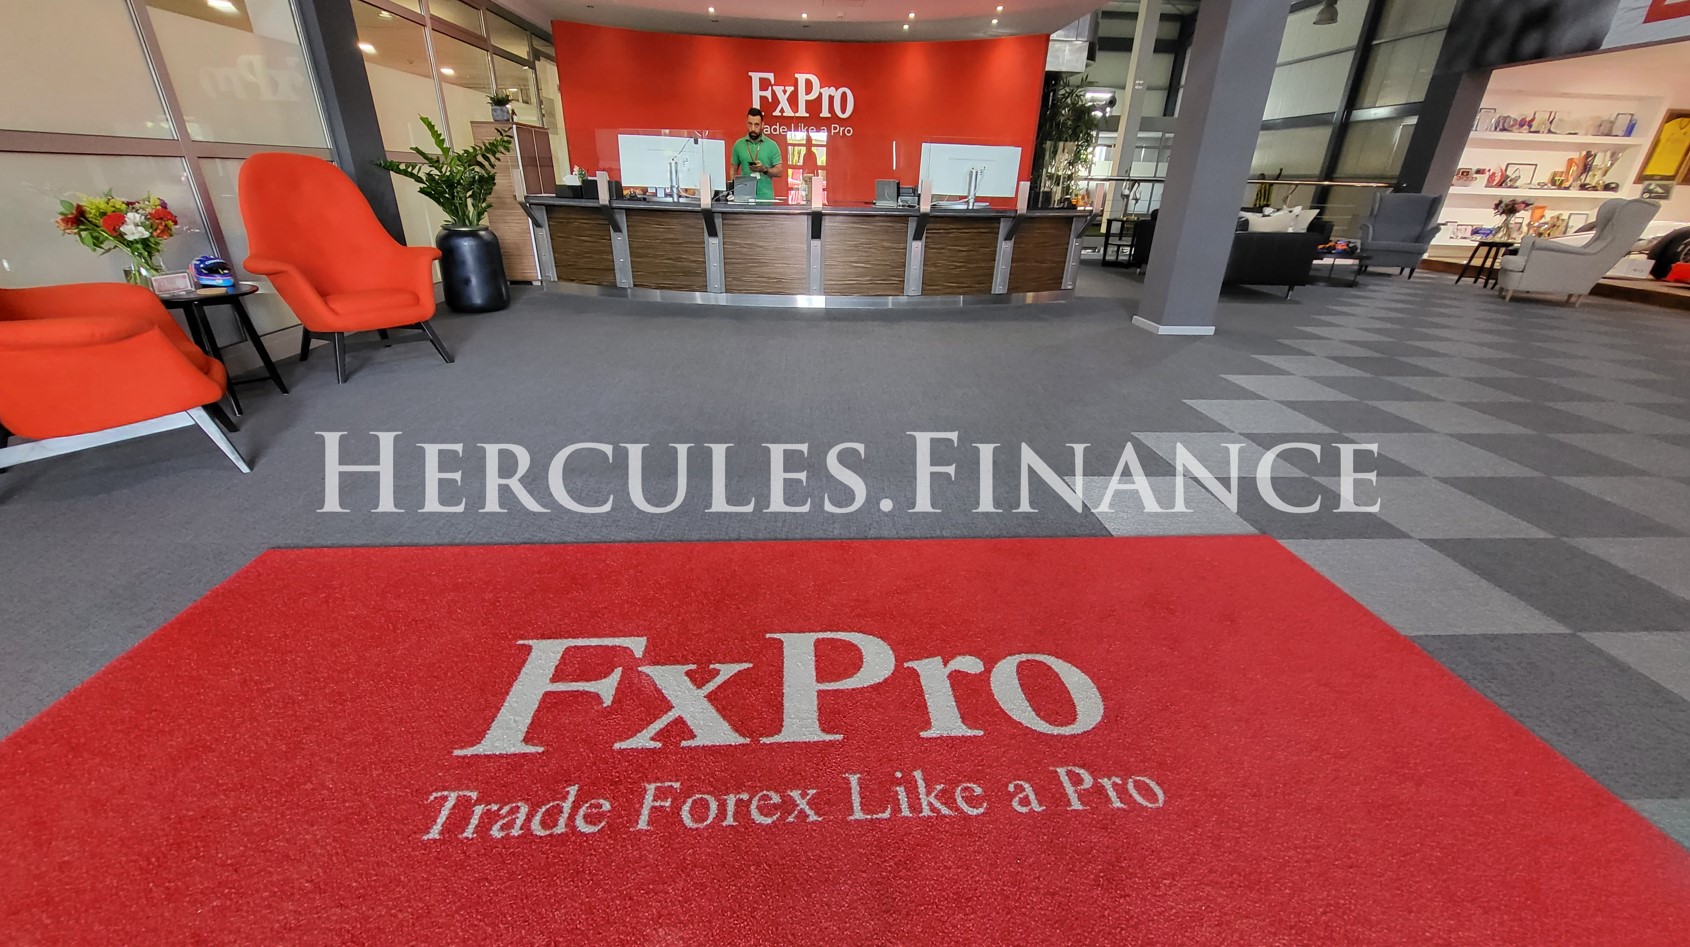 FXPro Office in Cyprus